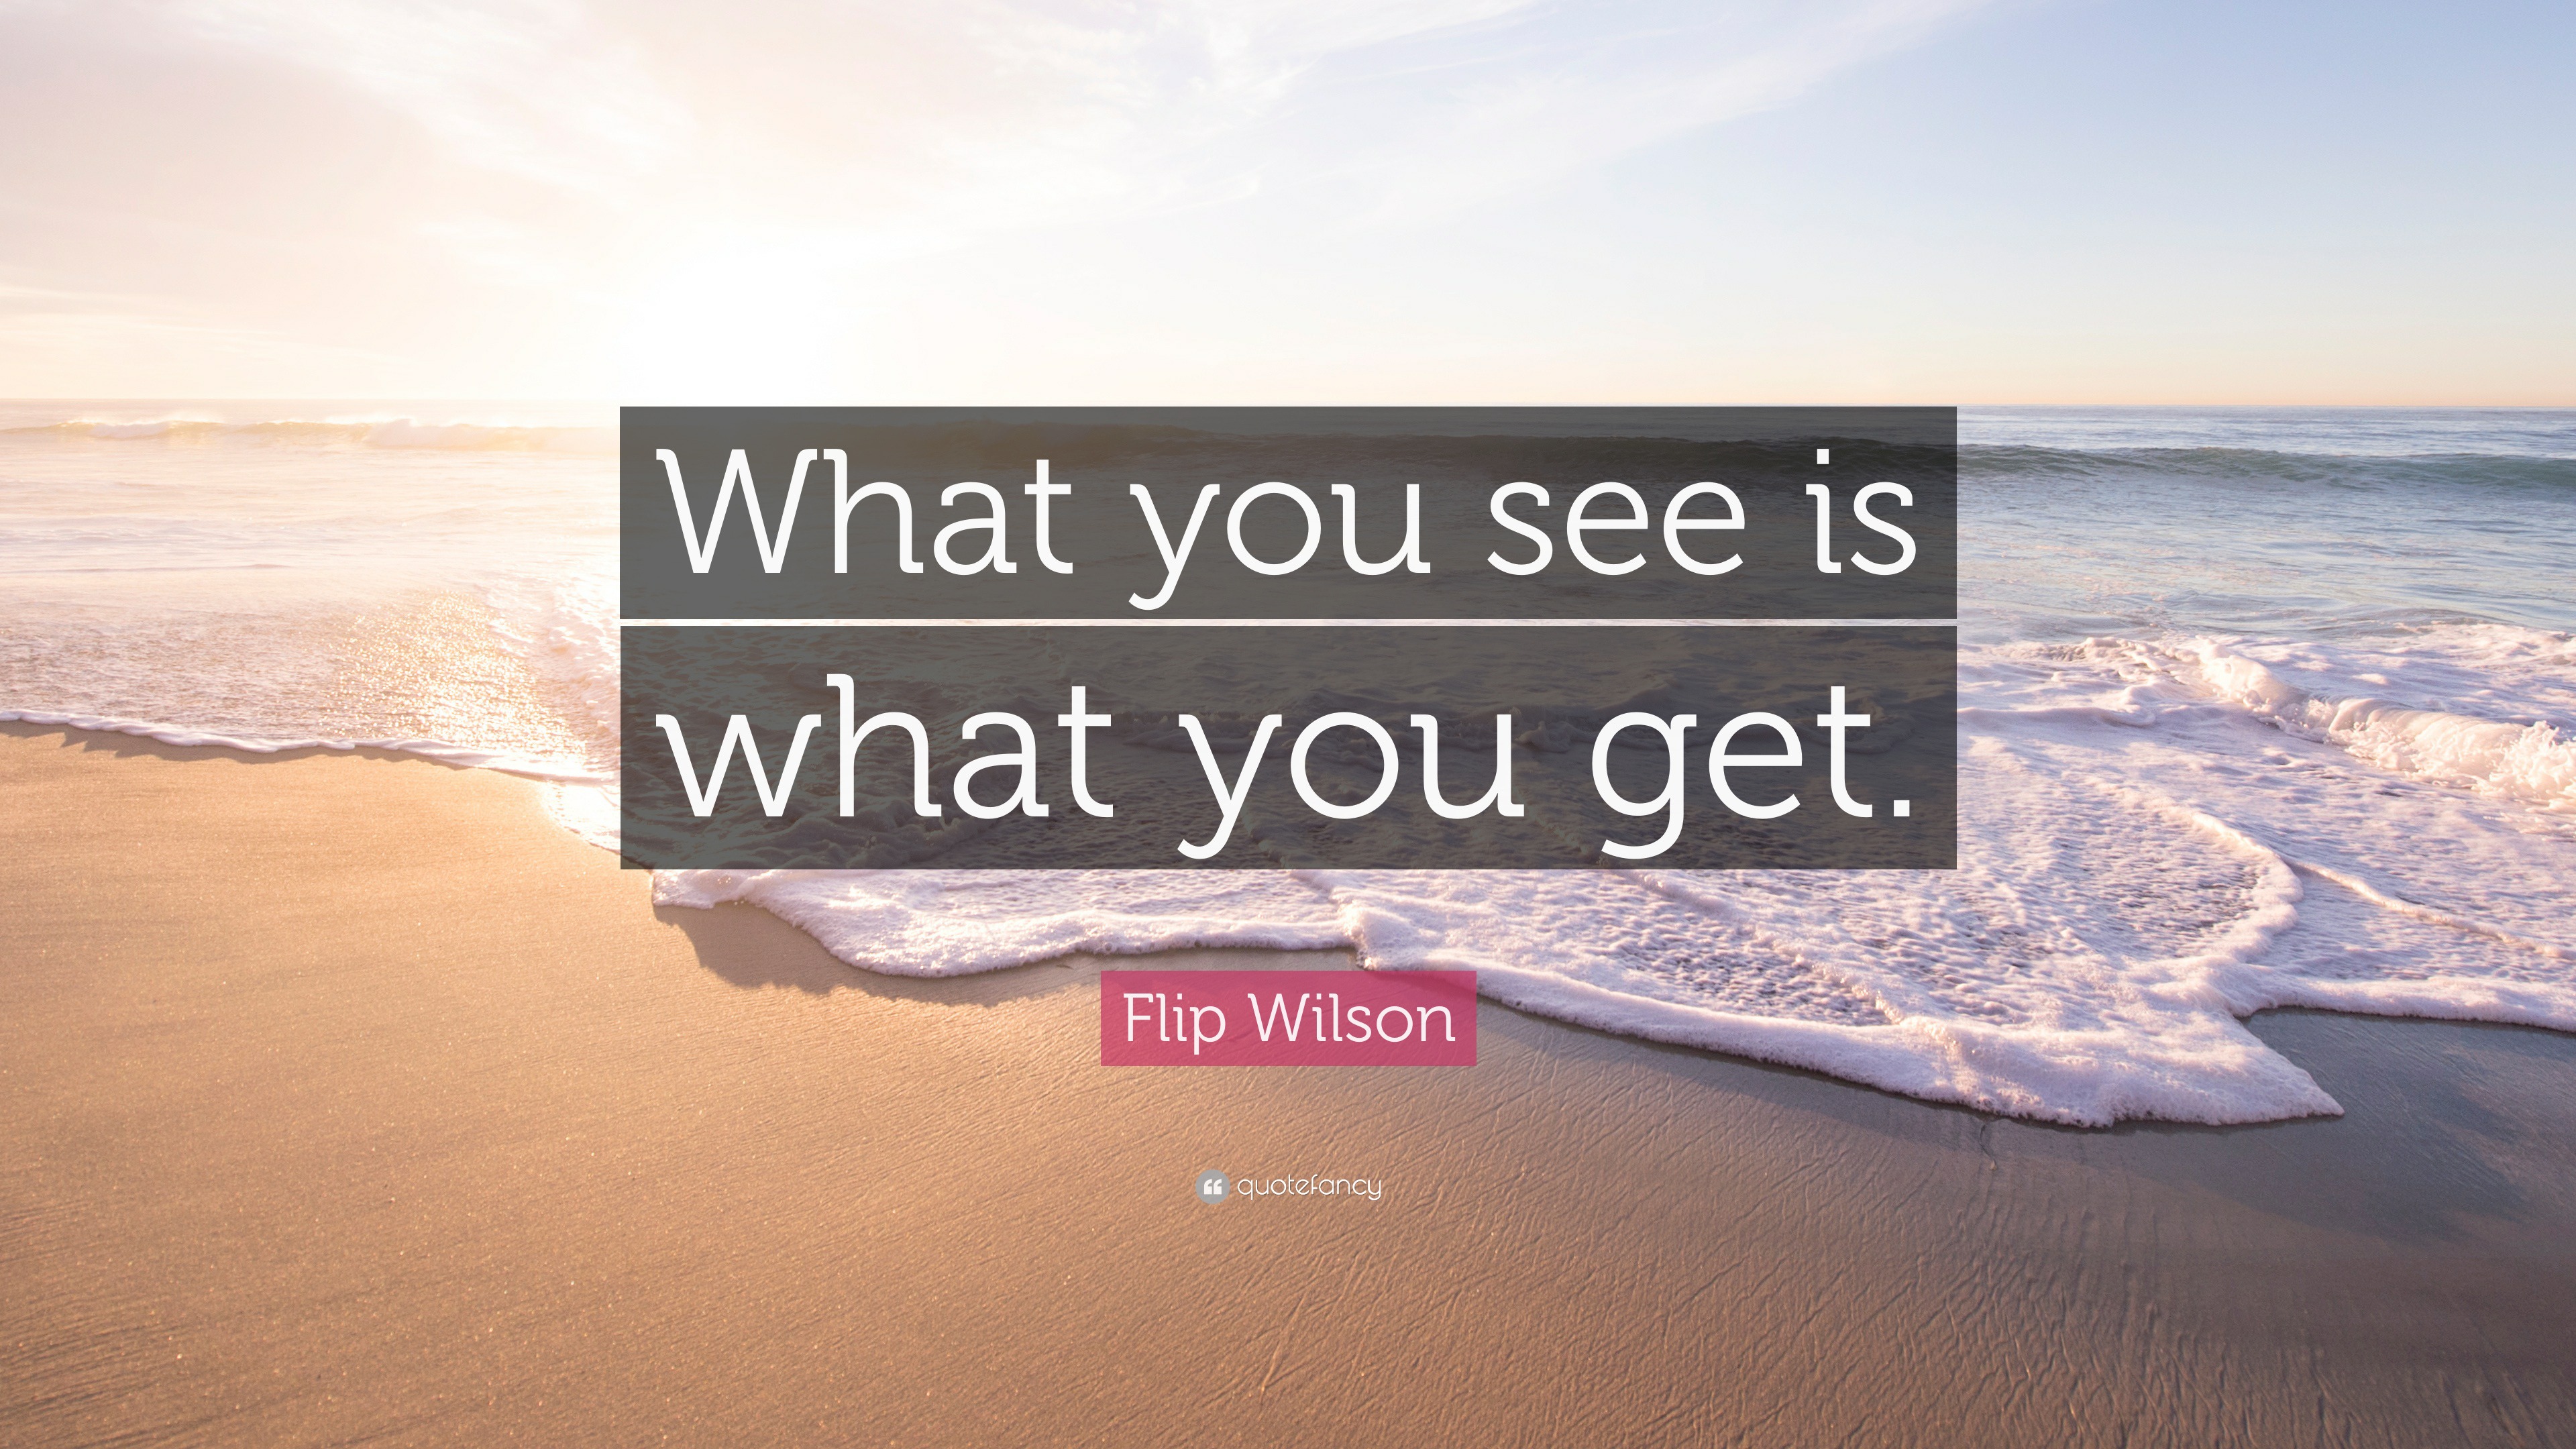 Flip Wilson Quote: “What you see is what you get.”